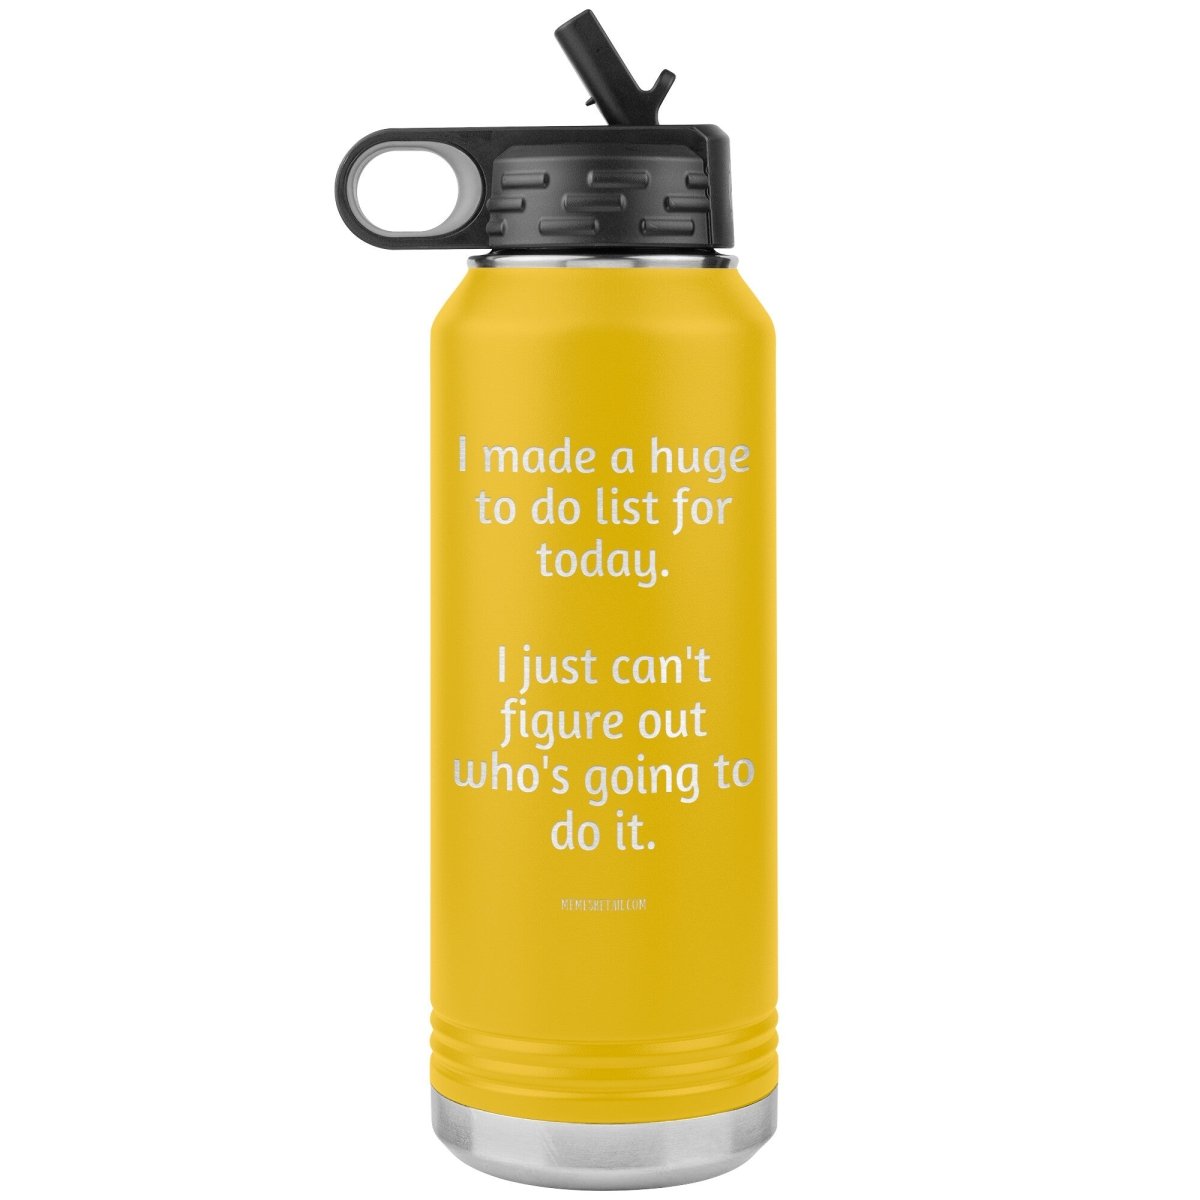 I made a huge to do list for today. I just can't figure out who's going to do it. 32 oz Water Tumbler, Yellow - MemesRetail.com